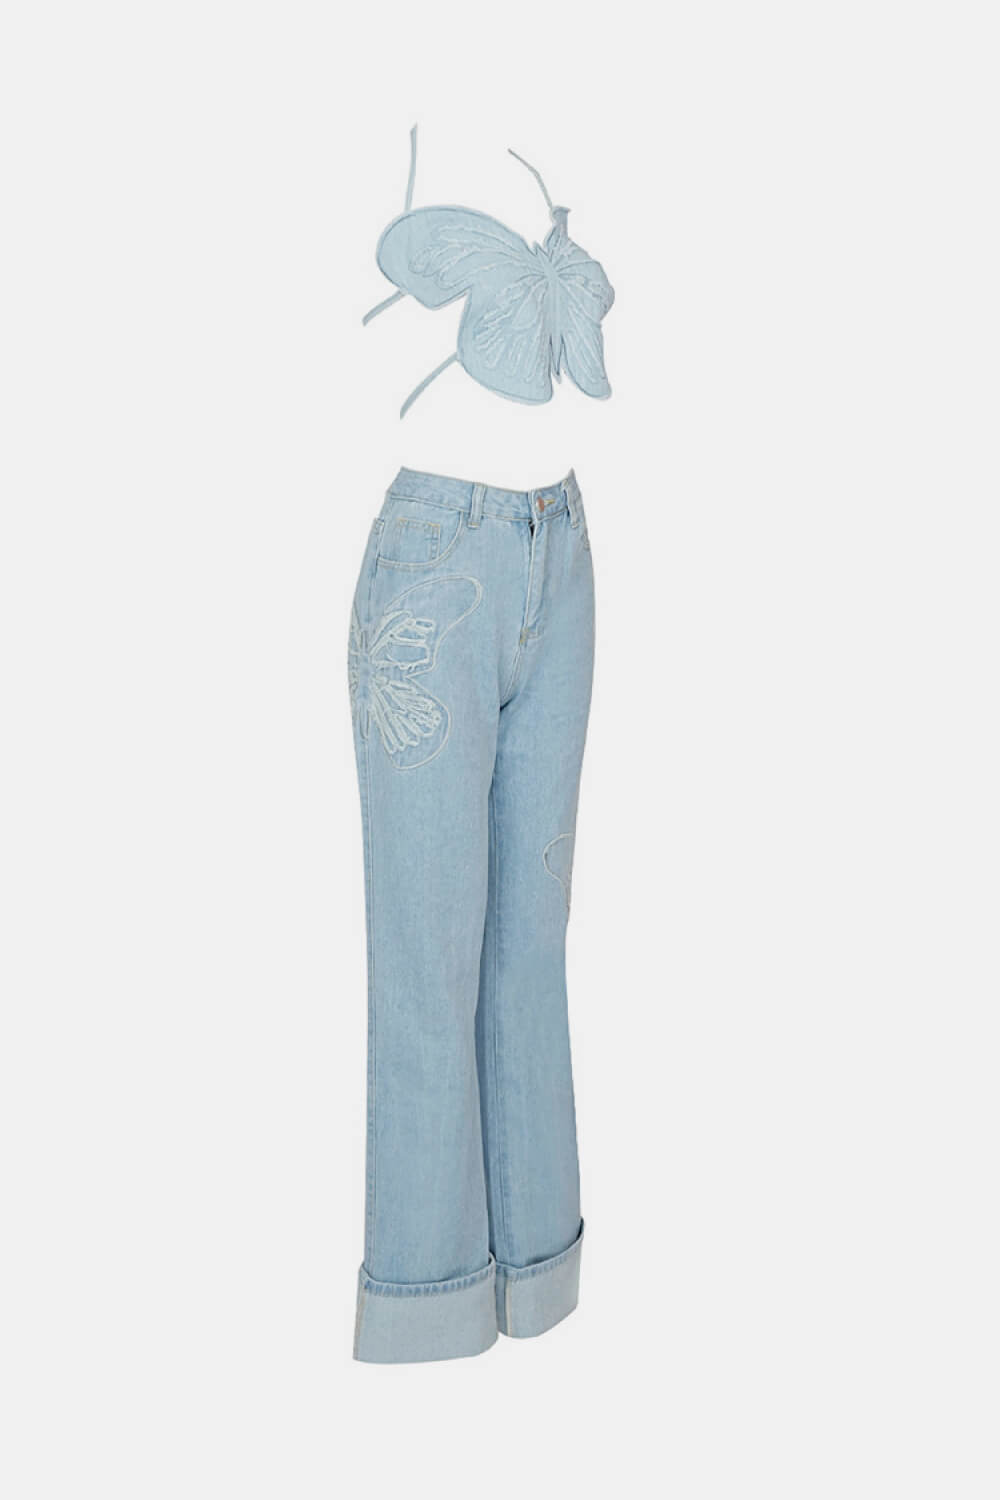 Butterfly Halter Neck Denim Top and Jeans Set BLUE ZONE PLANET